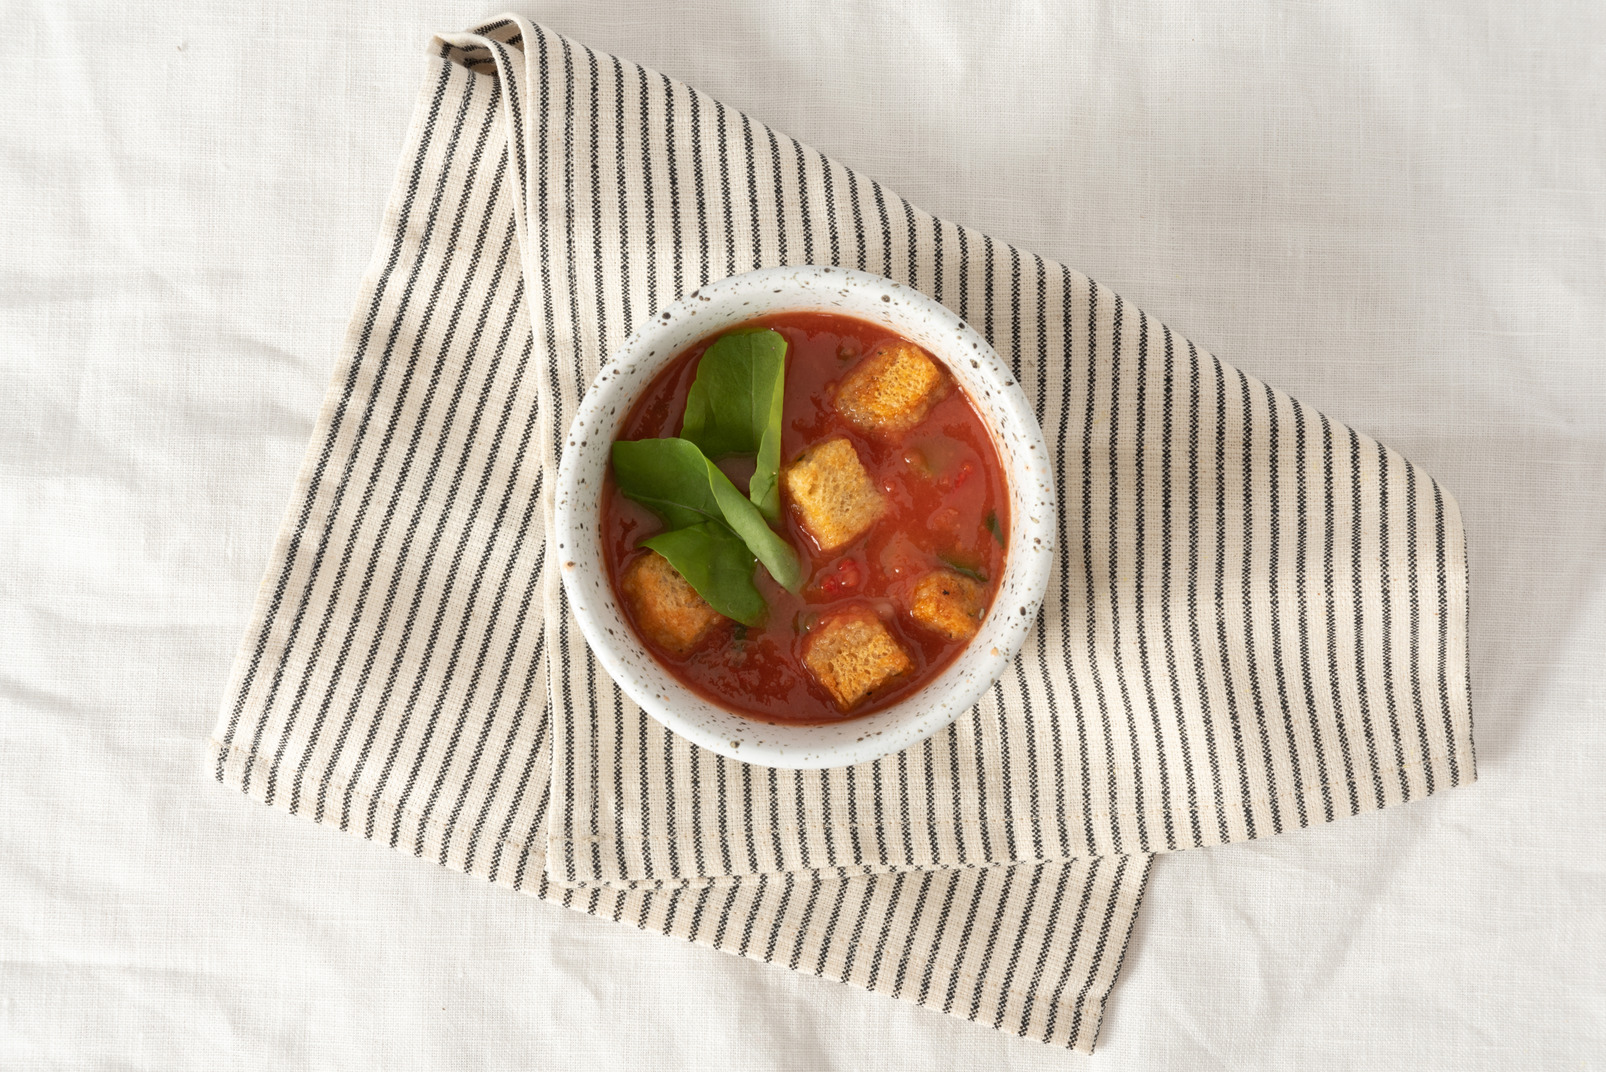 Tasty and refreshing gazpacho is the best choice for a hot summer day